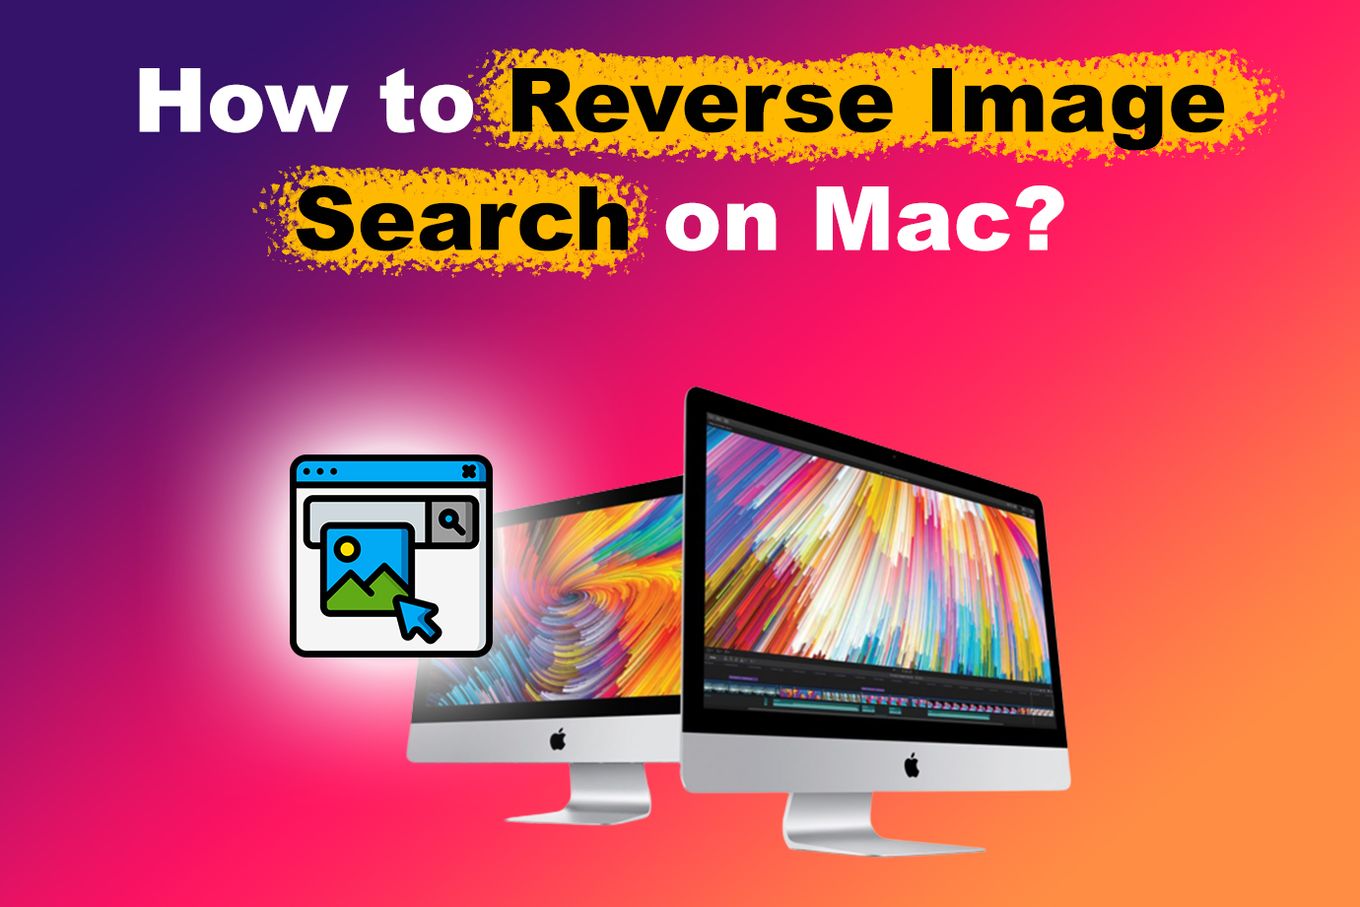 How to Reverse Image Search on Mac